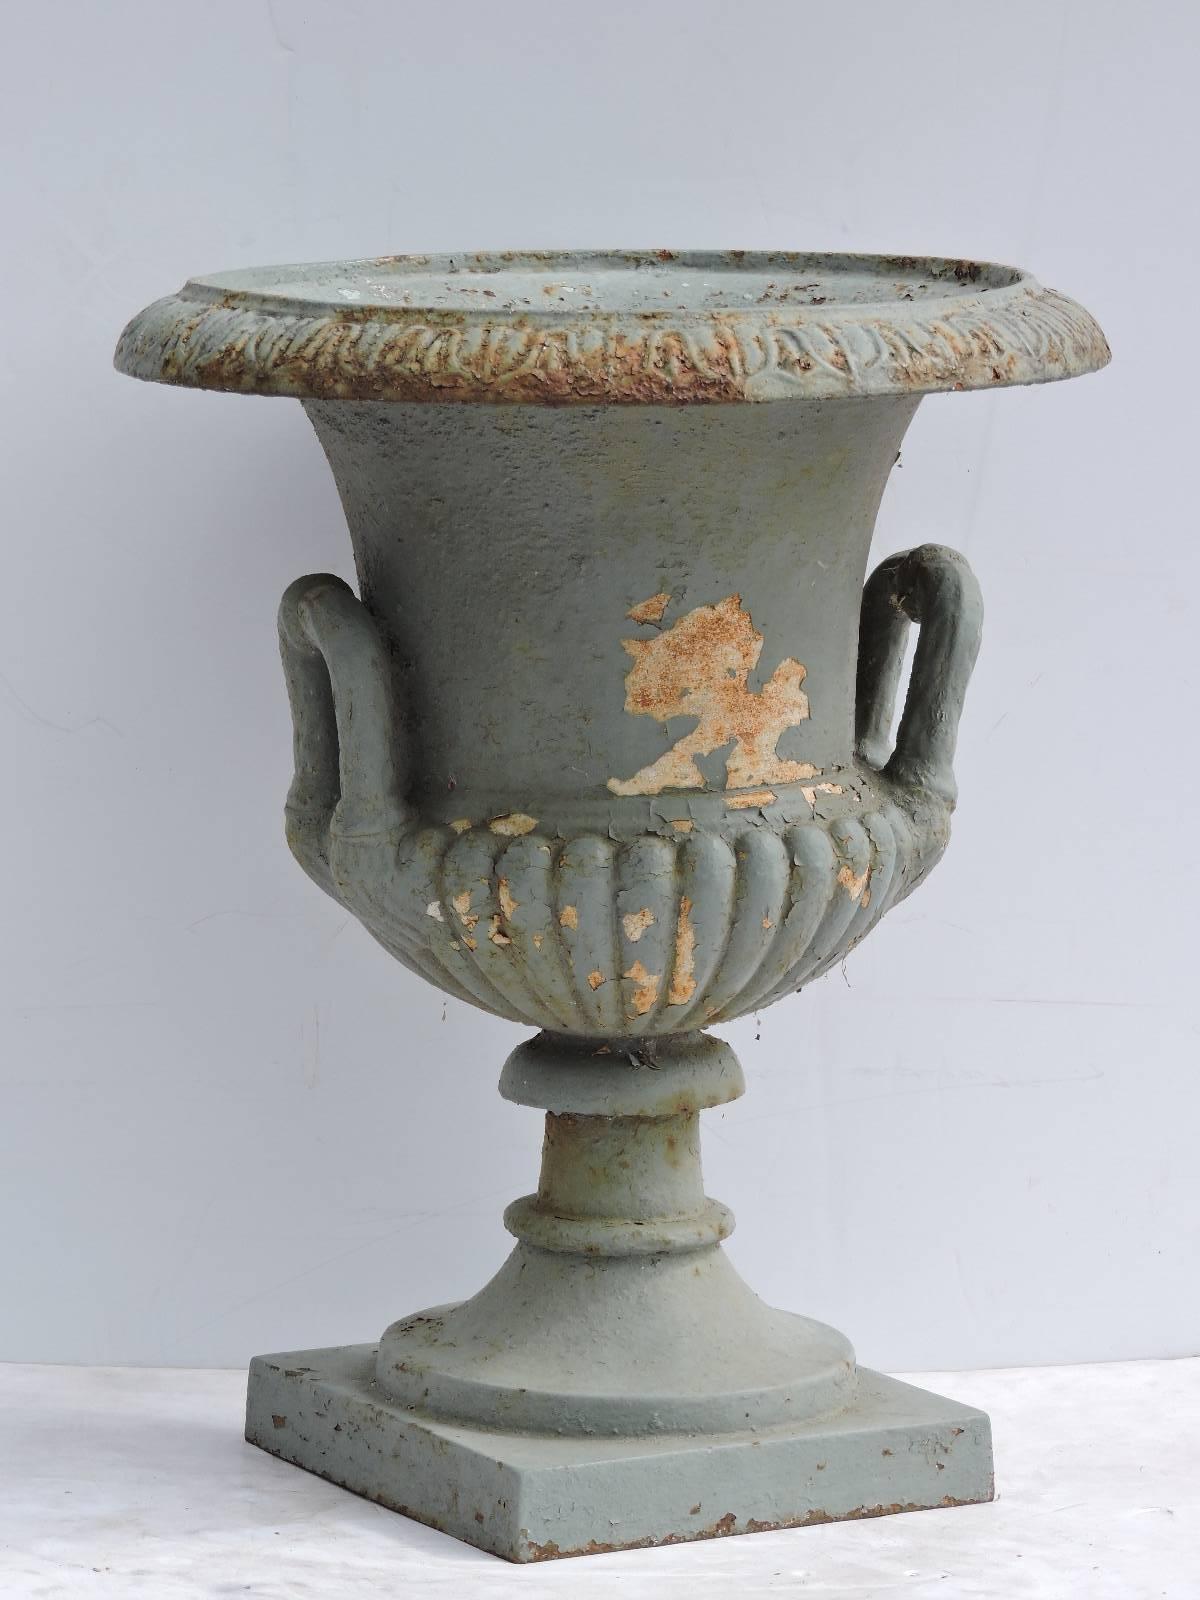 Antique classical campagna form cast iron garden urn in older worn gray green painted surface with underlying white paint evident, American, circa 1900.